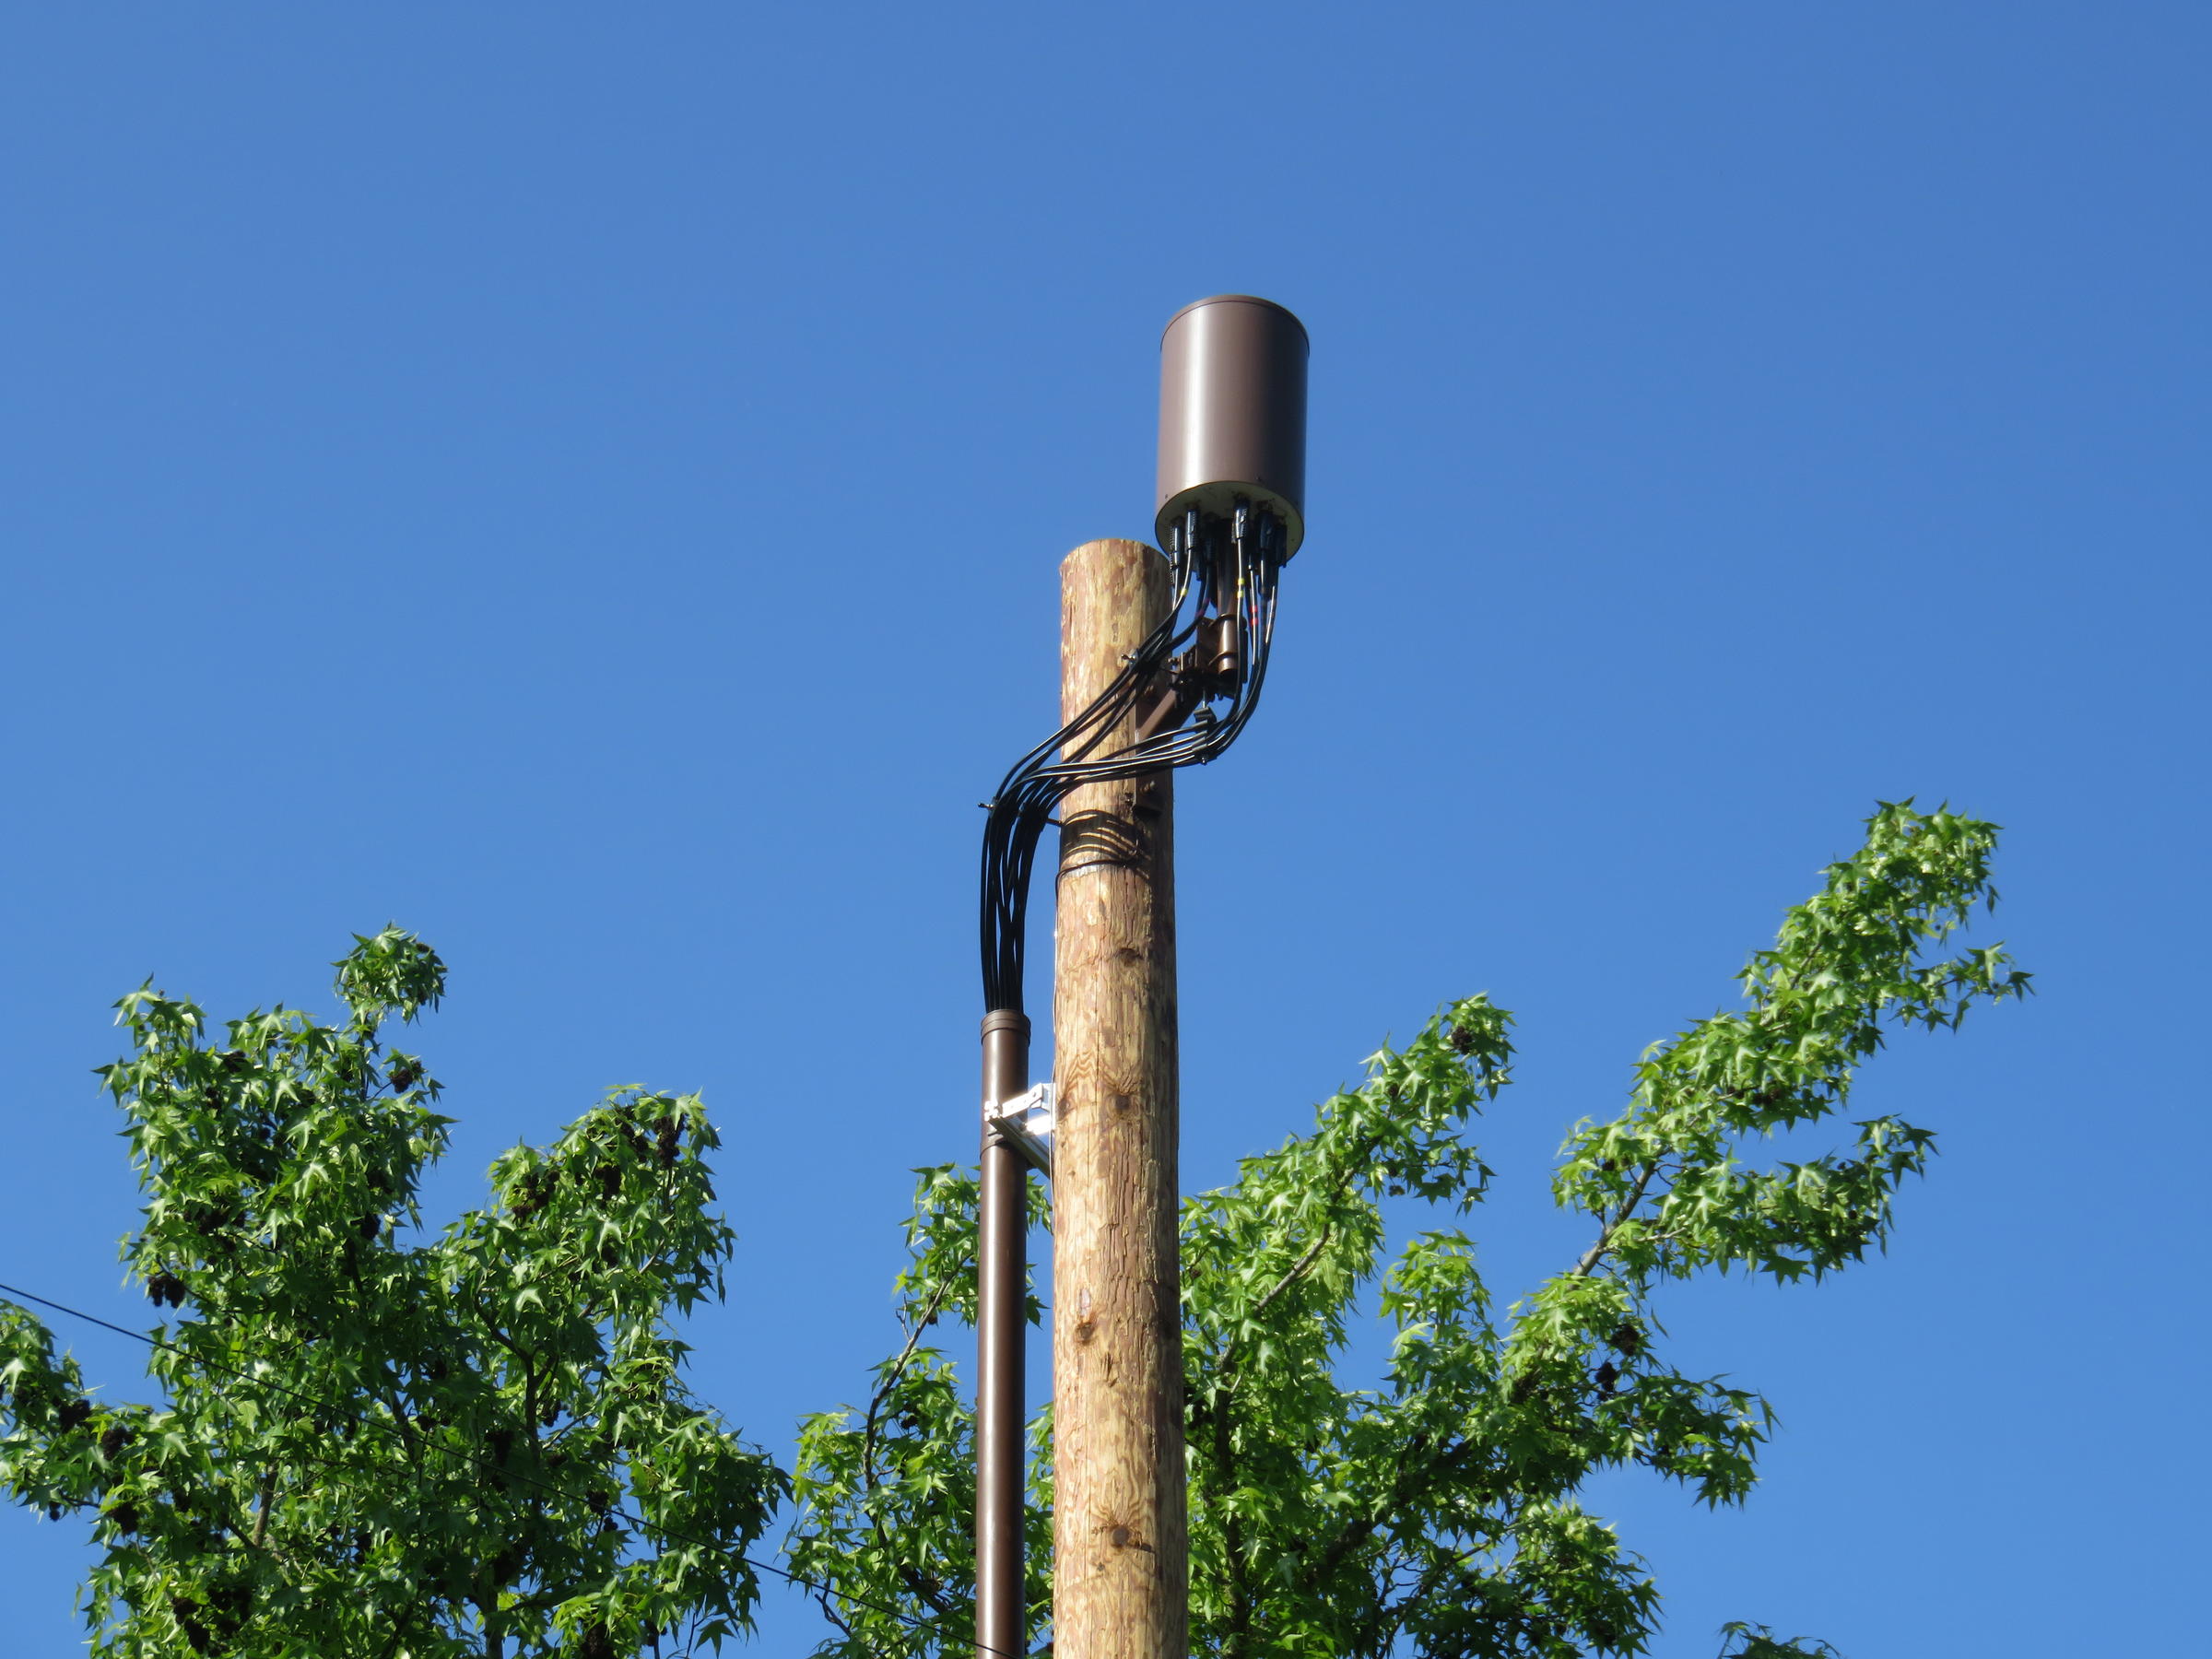 Another example of a backpack-sized small cell antenna, this one atop a power pole on a residential street corner in Eugene.